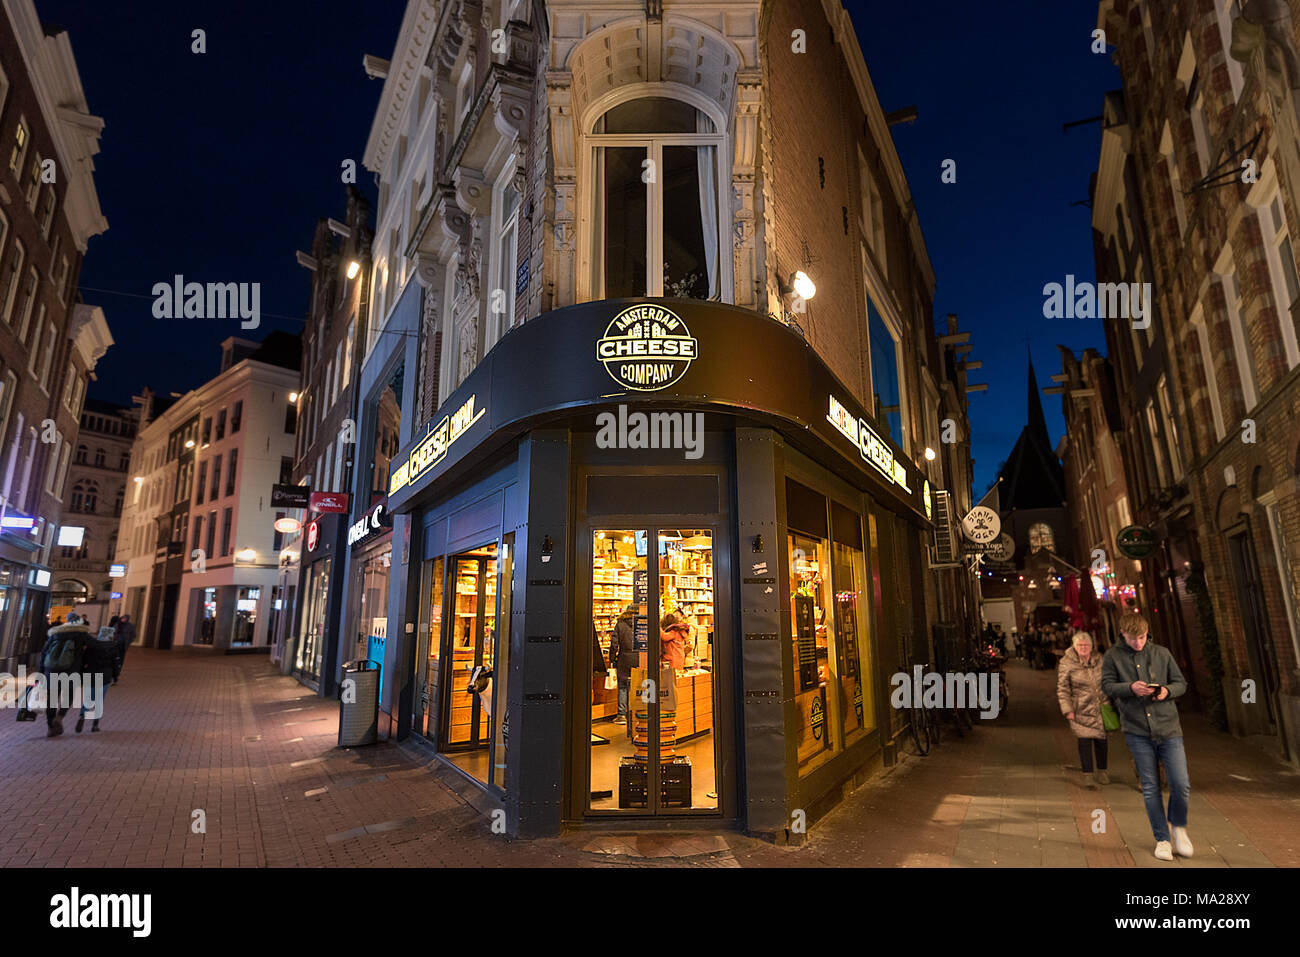 An interesting corner location shop of the Amsterdam Cheese Company on a pedestrianised street in Amsterdam, Netherlands. Stock Photo